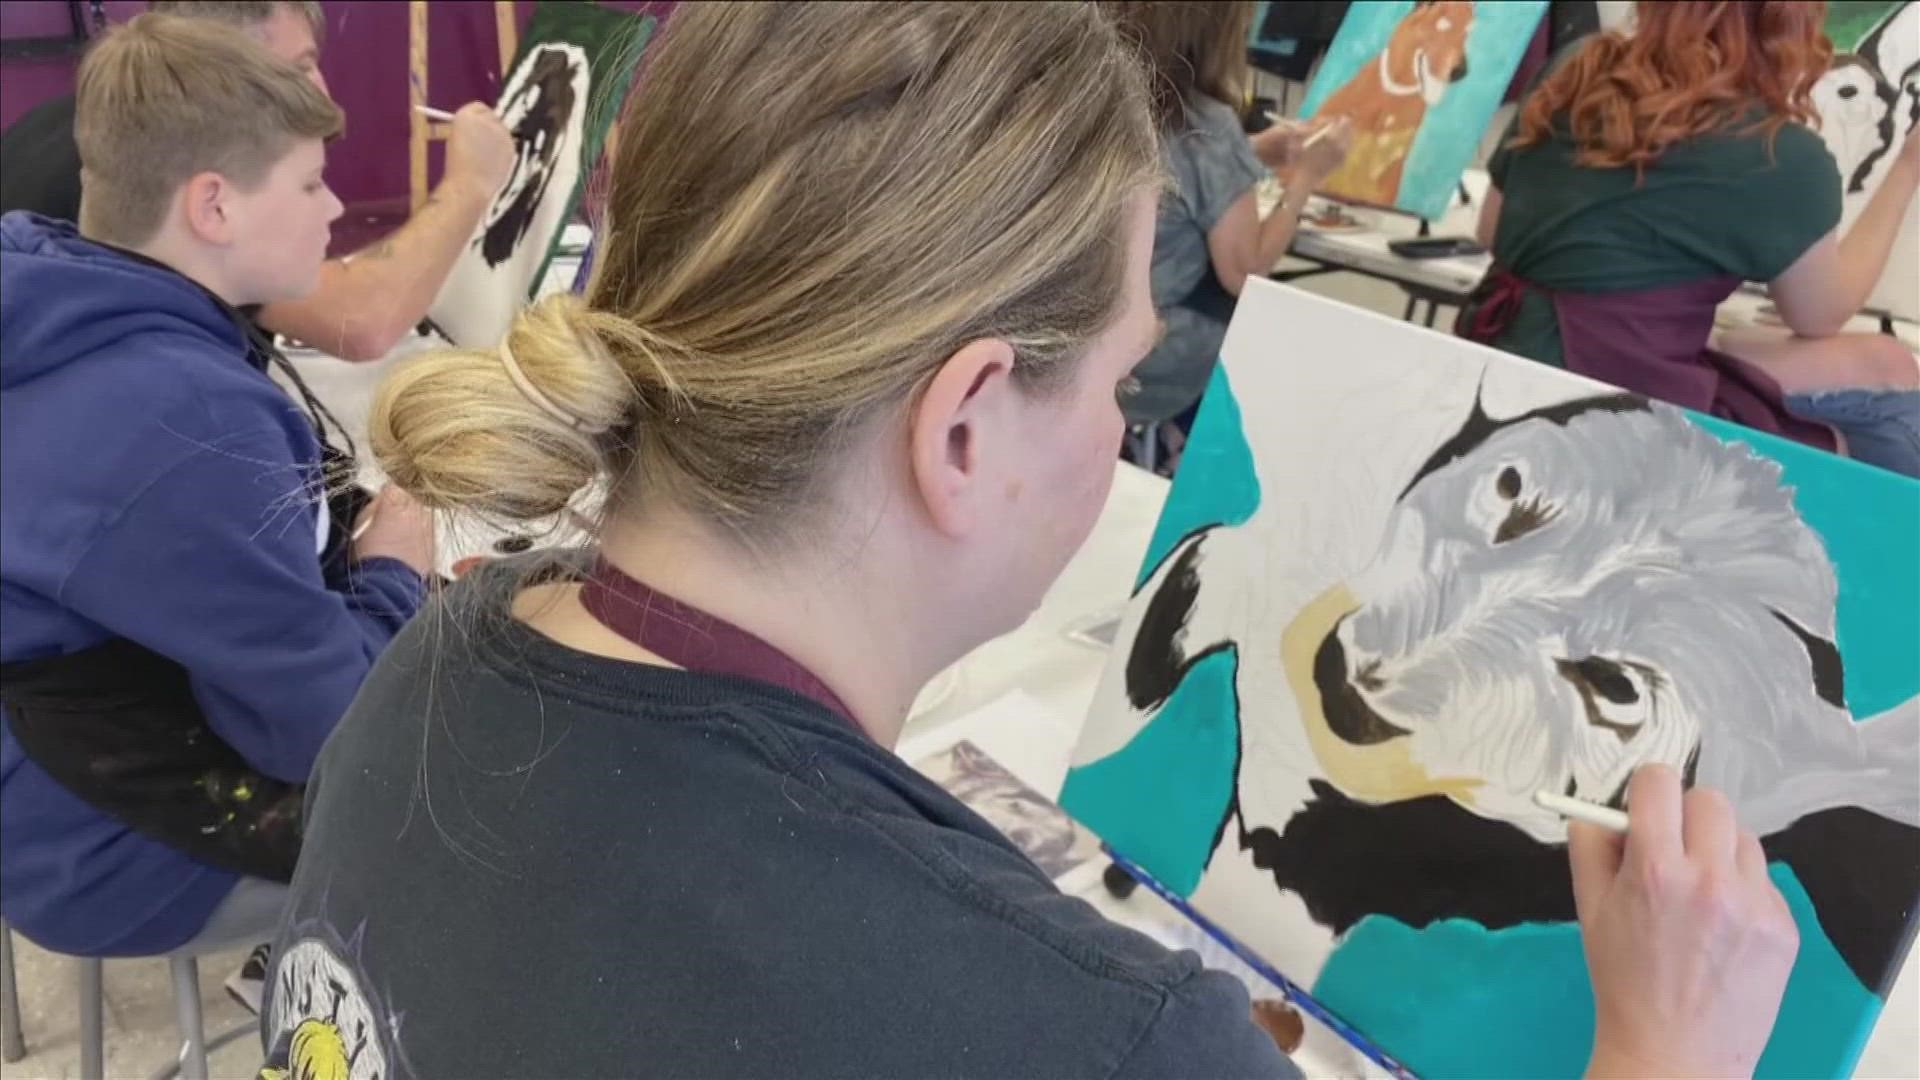 As service dogs can cost up to $30,000 for training, national studio franchise "Painting with a Twist" offered a fundraiser to each location, including Olive Branch.